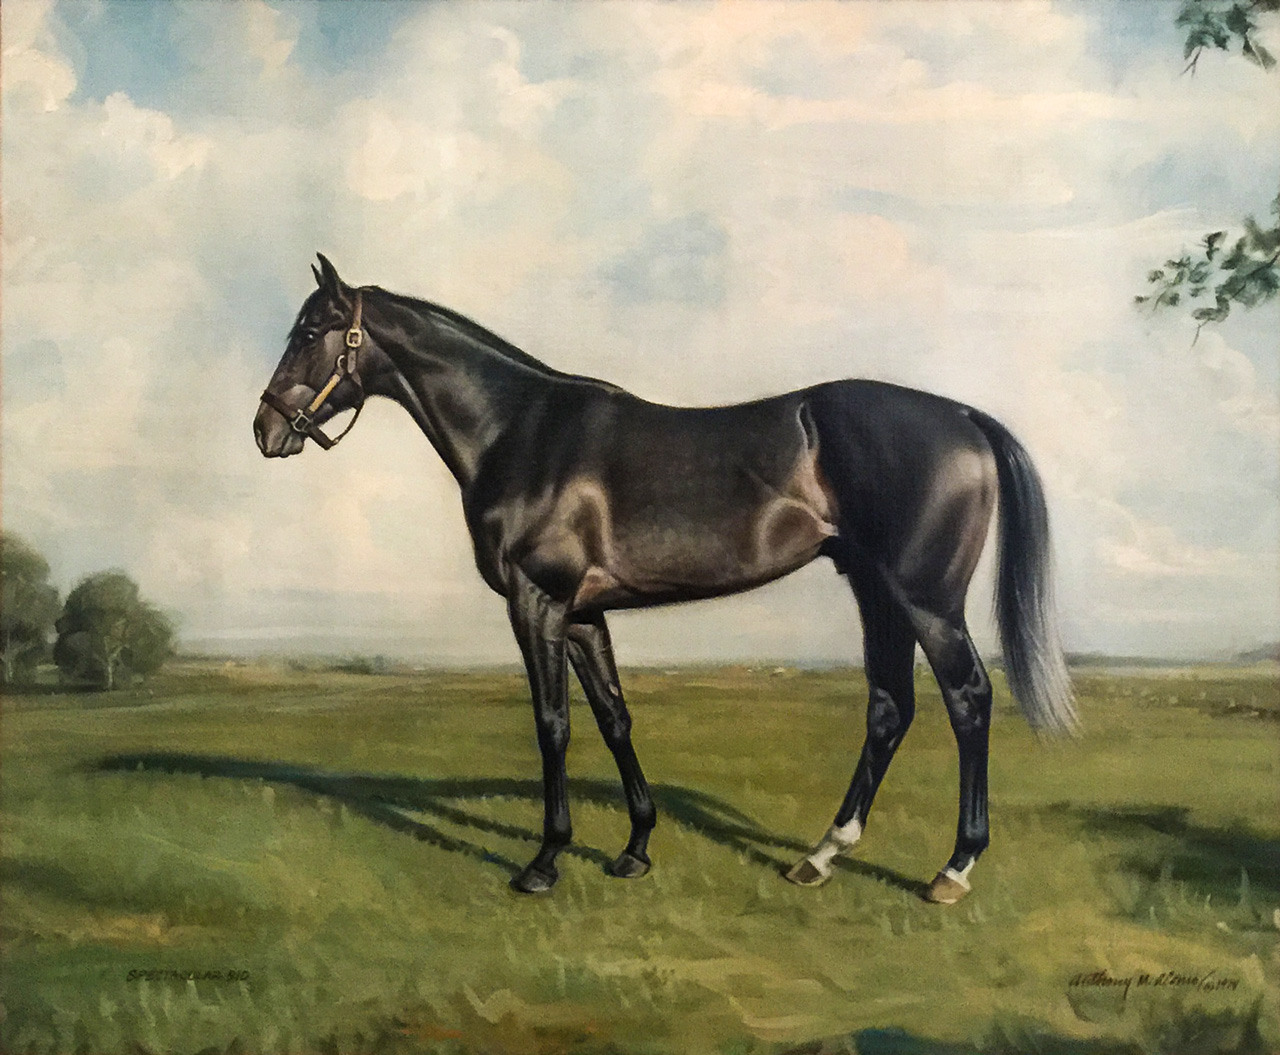 “Spectacular Bid” 1979, Oil on canvas, 20 x 24 inches, Inscribed, Signed & Dated